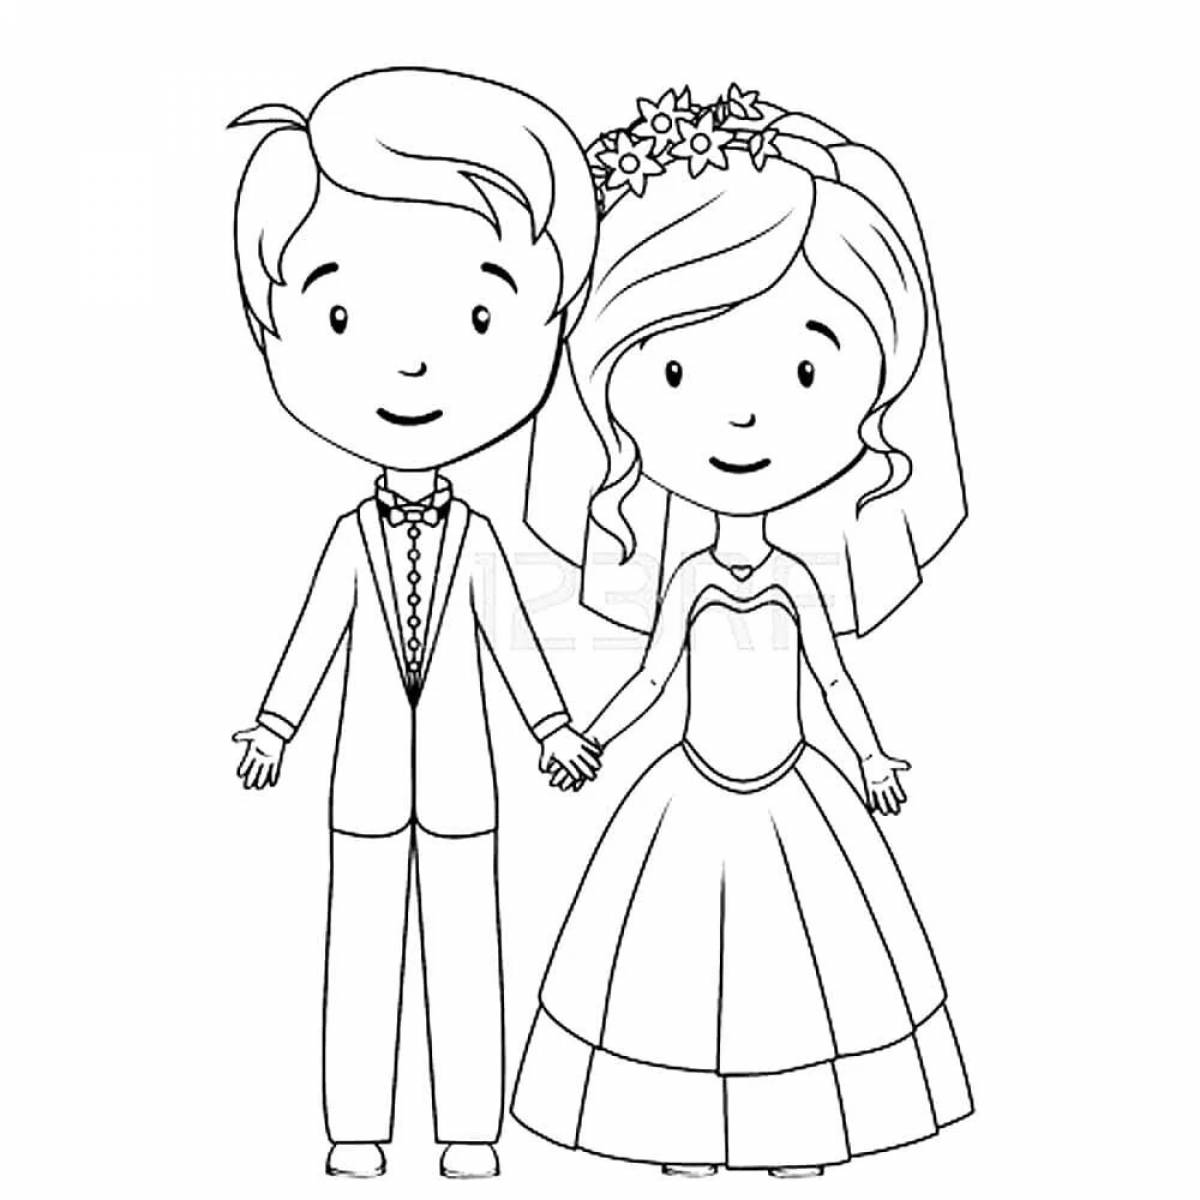 Bride and groom for kids #2